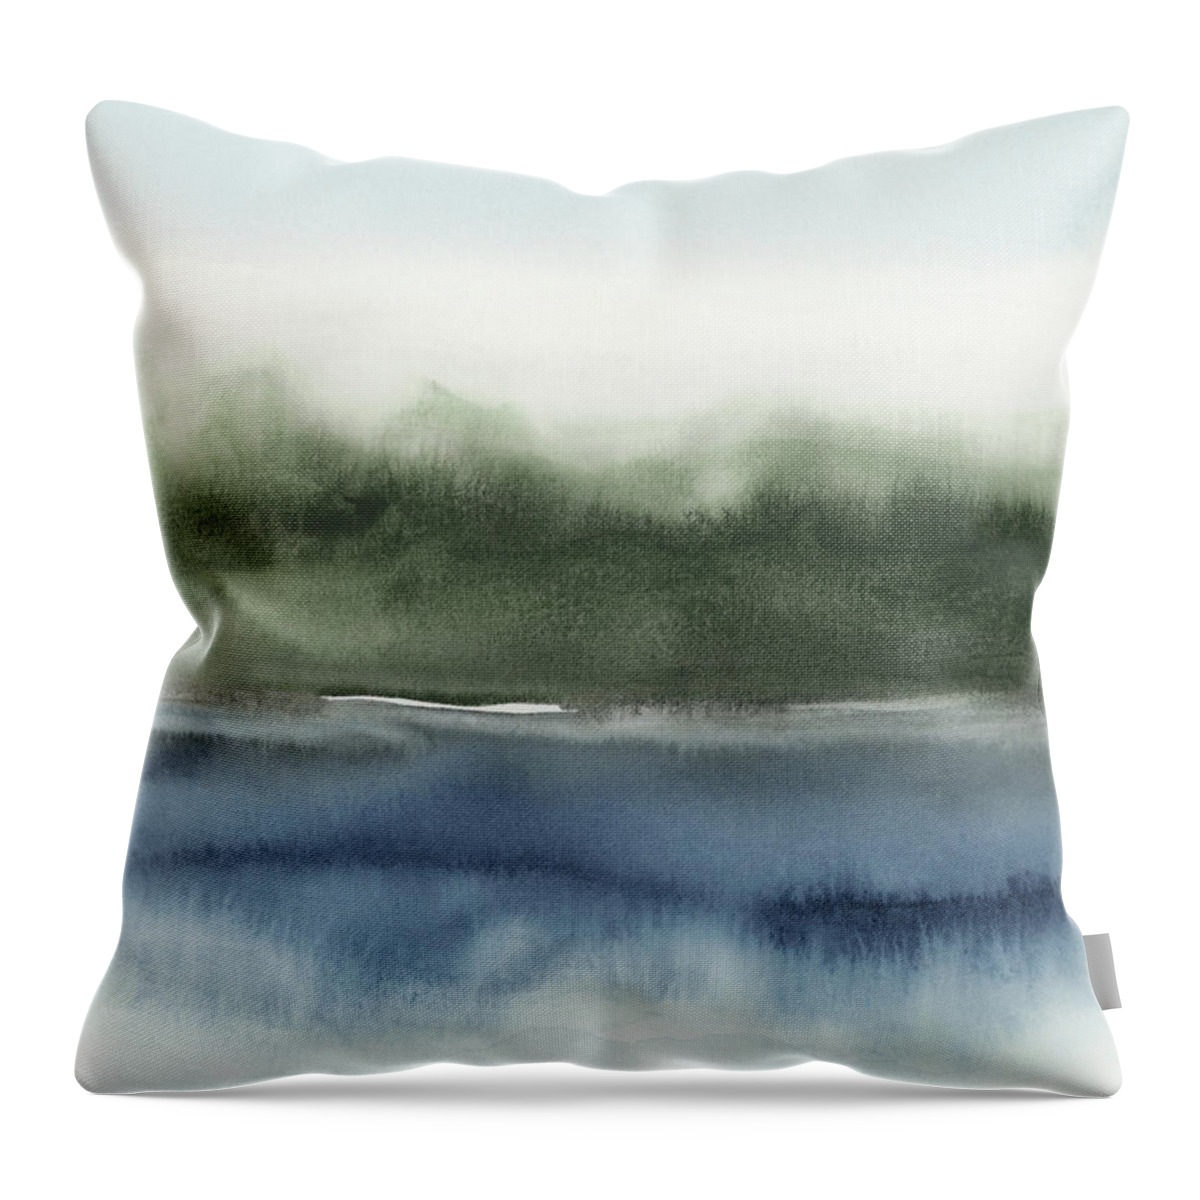 Navy Throw Pillow featuring the painting Forest Reflection II by Rachel Elise